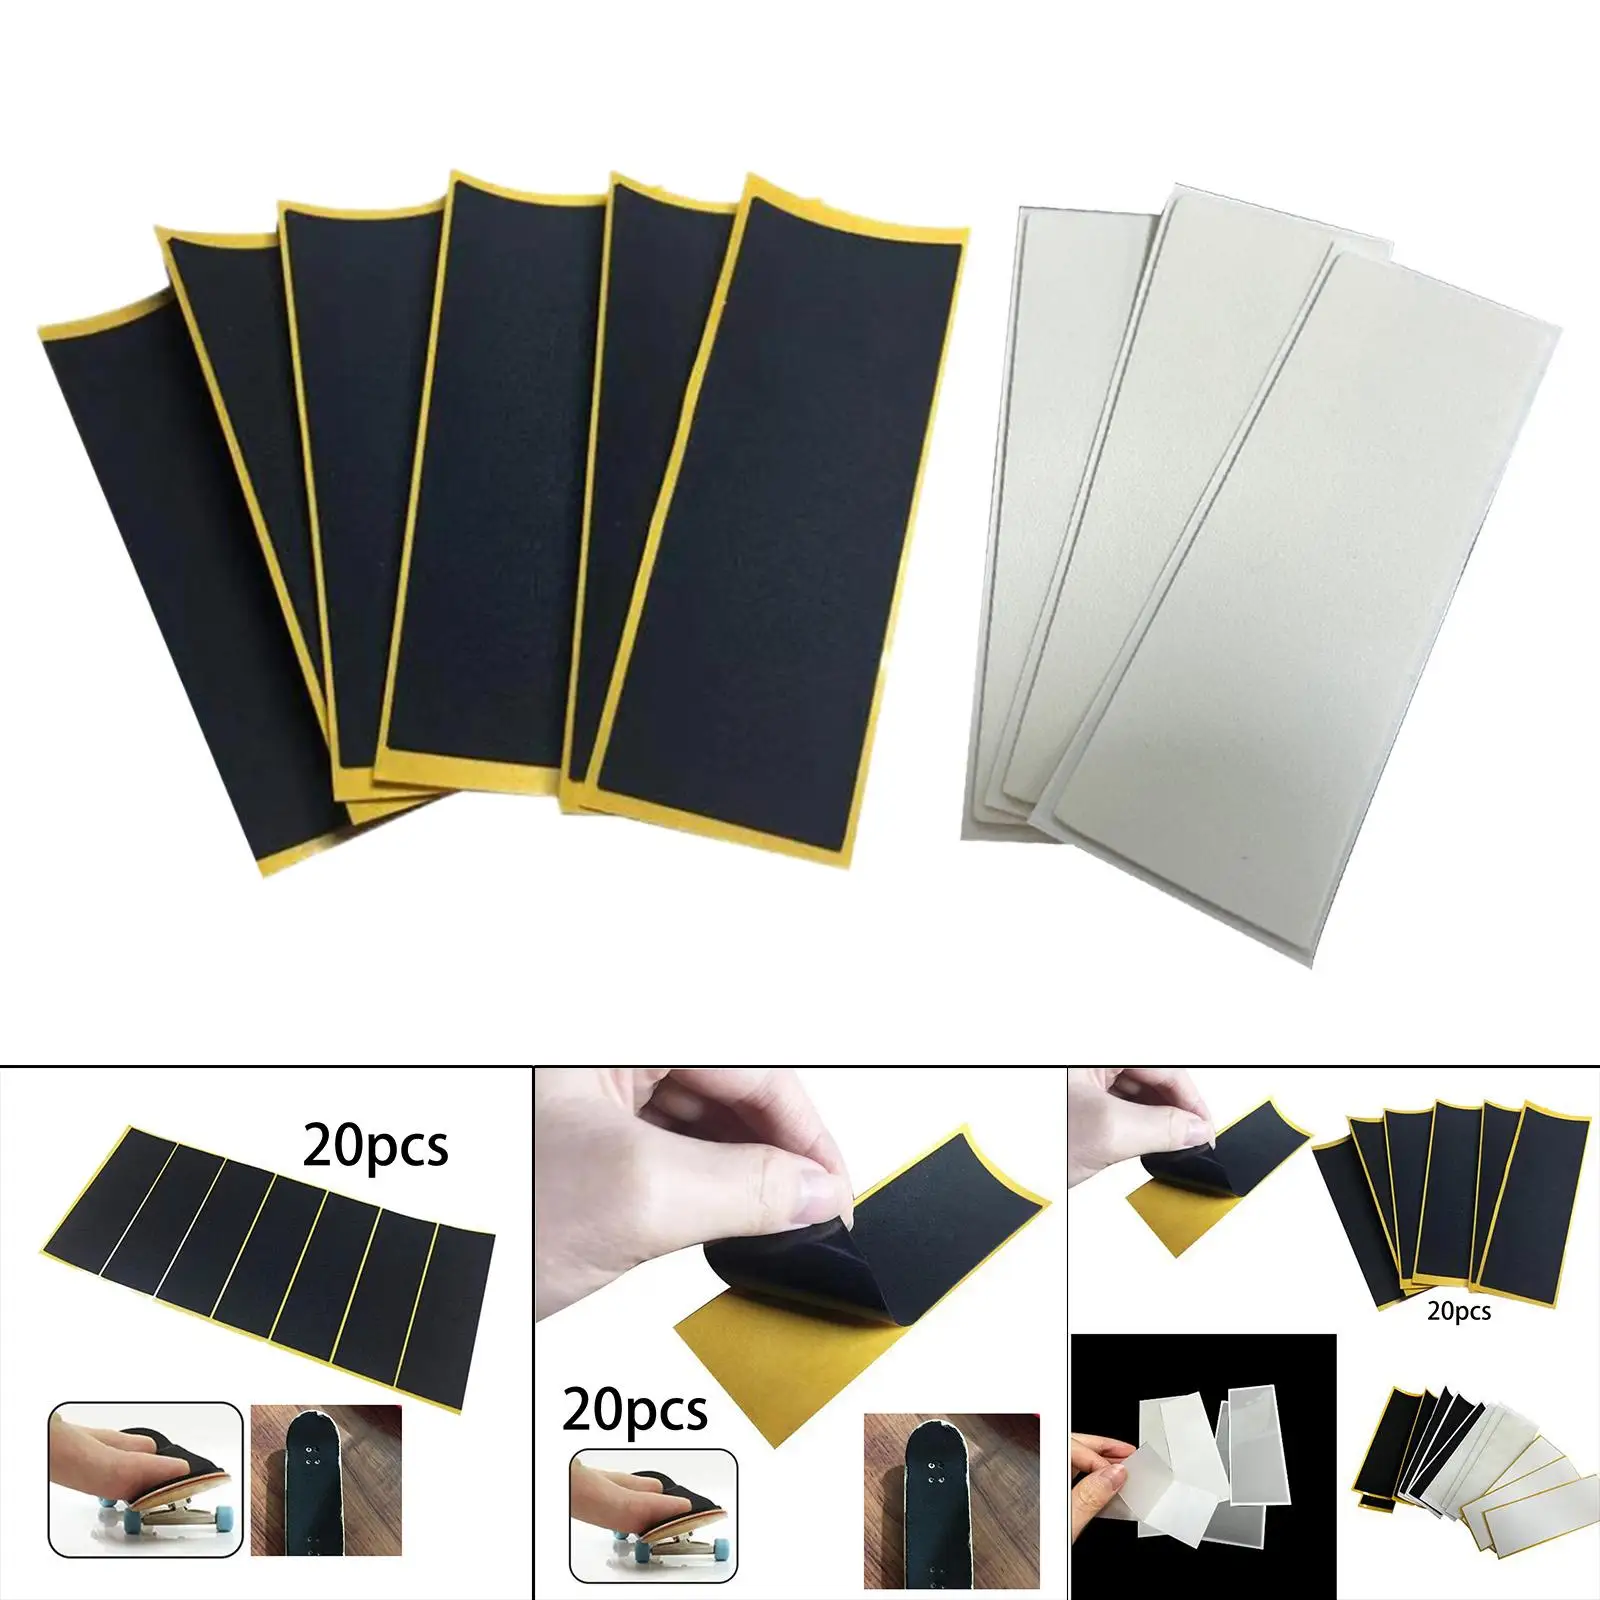 20 Pieces Fingerboard Deck Tape Adhesive Non Slip 11x3.8cm Skateboard Foam Tape Stickers for Fingerboards Accessories